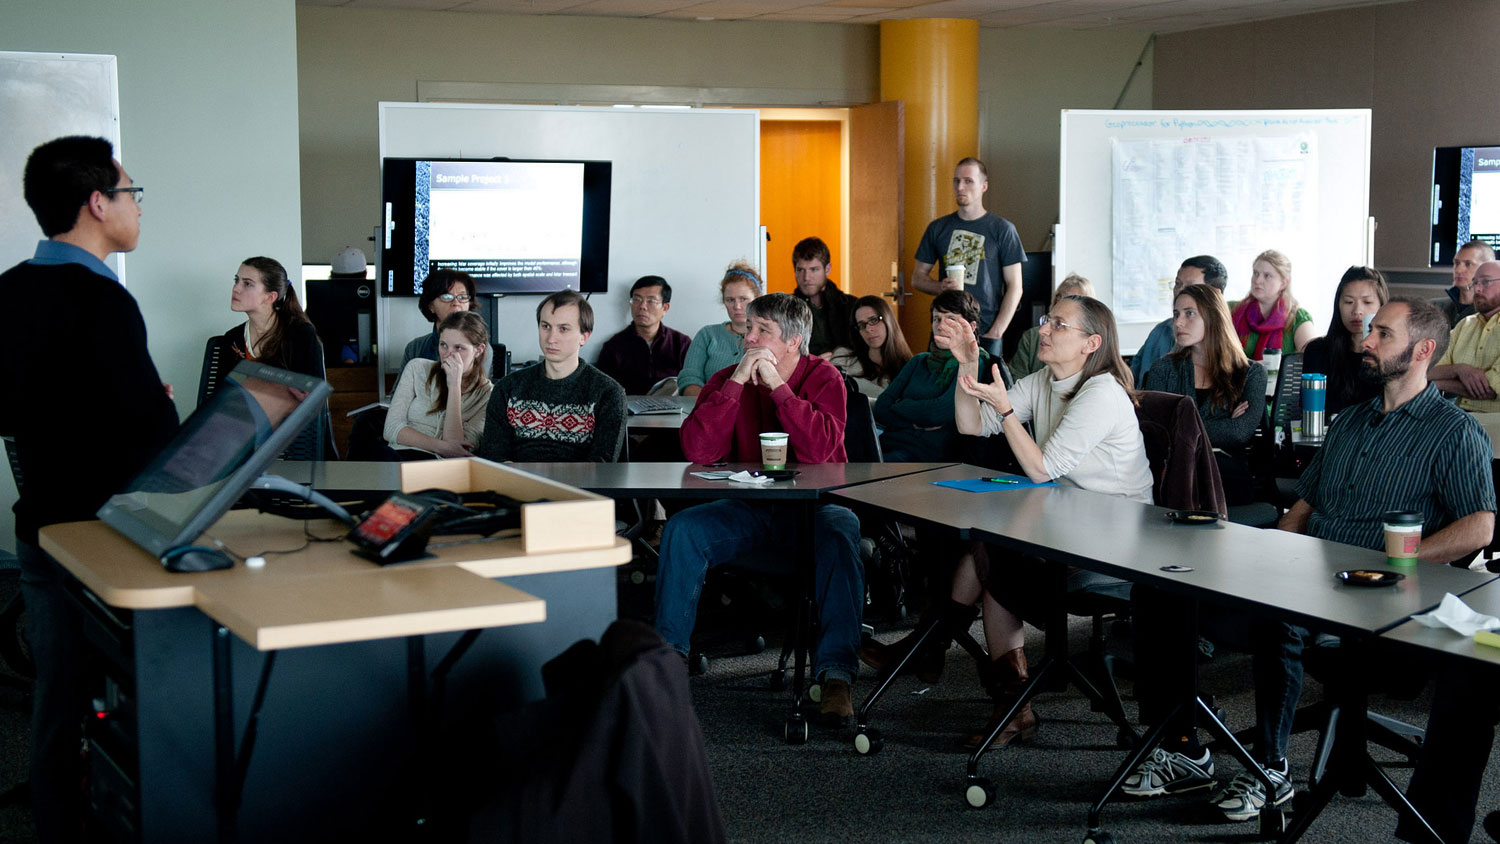 A photo of an audience at a presentation in an experimental classroom at the North Carolina Center for Geospatial Analytics